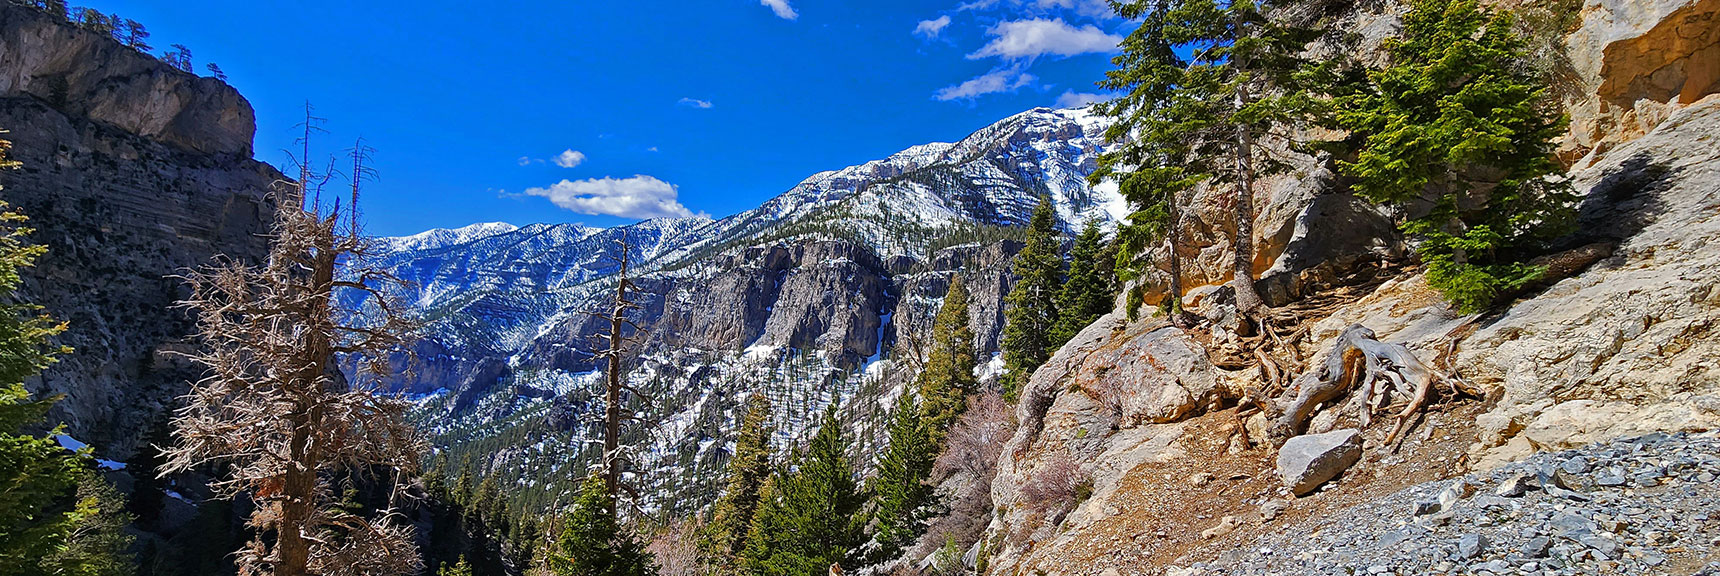 View Down Kyle Canyon from Near Cave Opening | Mary Jane Falls | Mt. Charleston Wilderness | Spring Mountains, Nevada